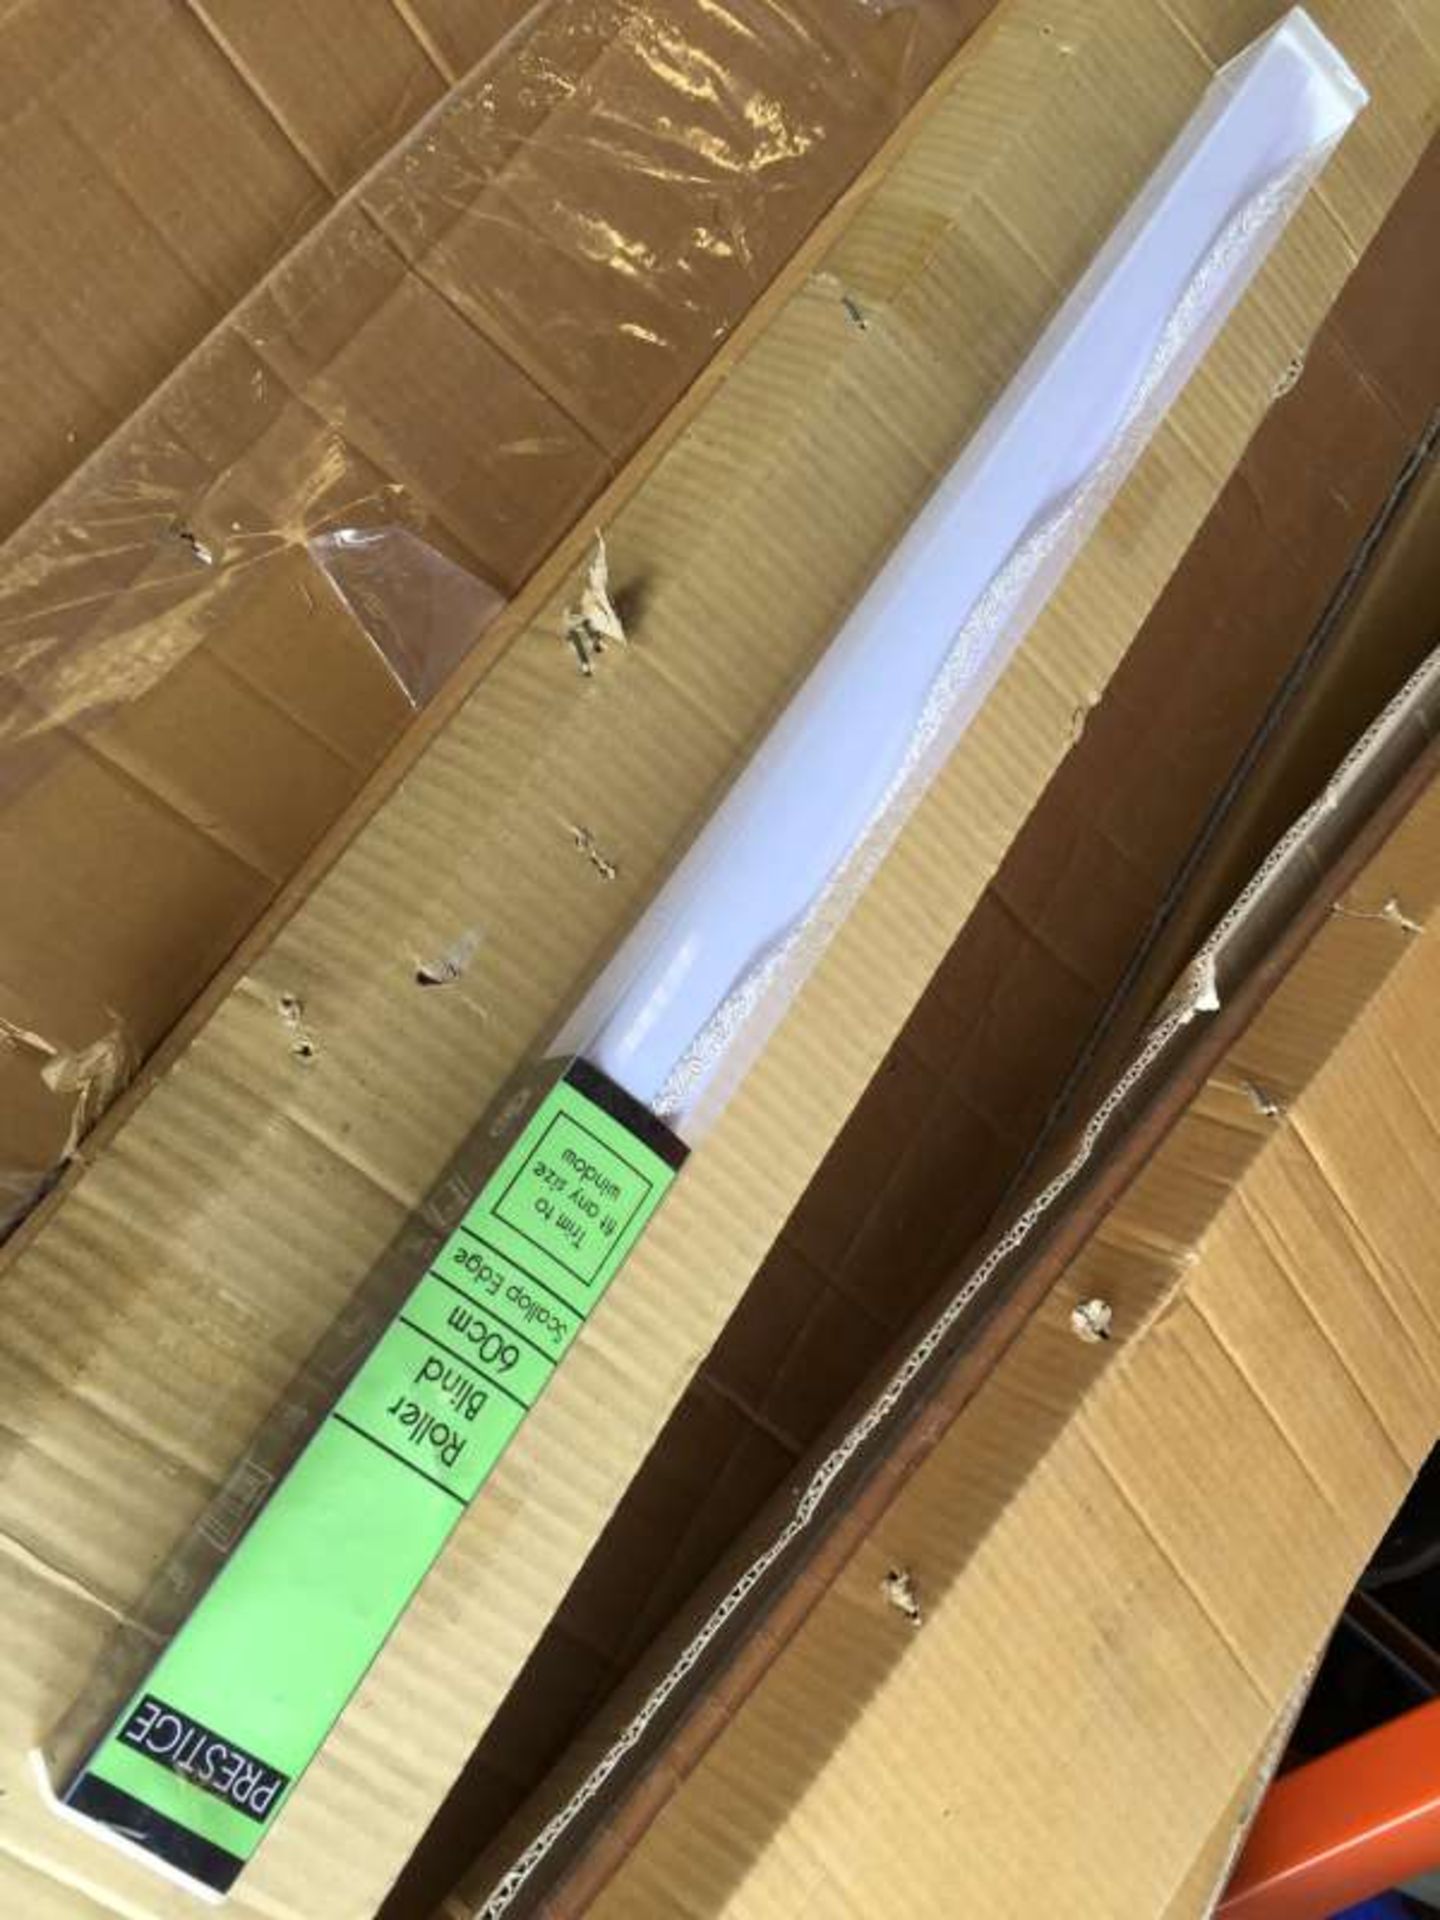 48 X60 CM SCALLOP EDGE ROLLER BLINDS IN 8 BOXES